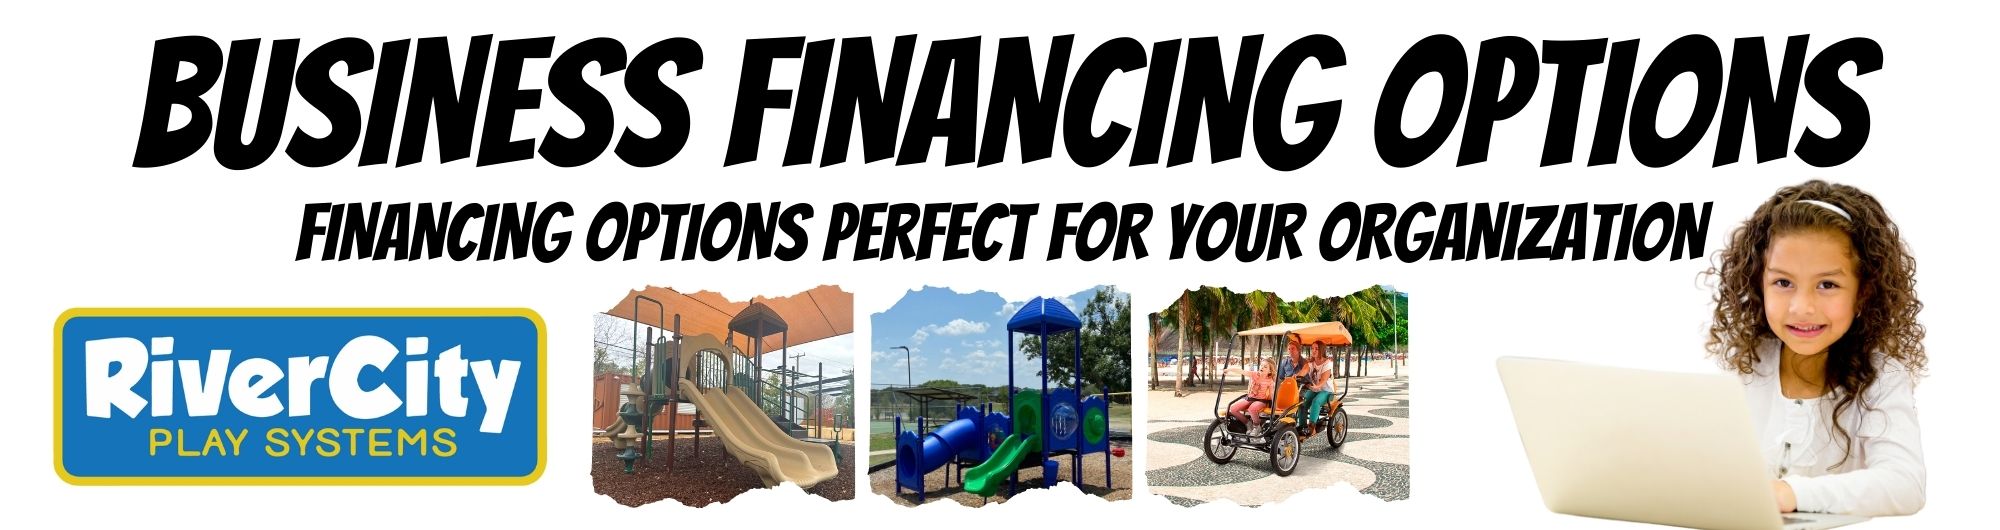 Finance your commercial playground project at River City Play Systems. Financing your playground purchase.